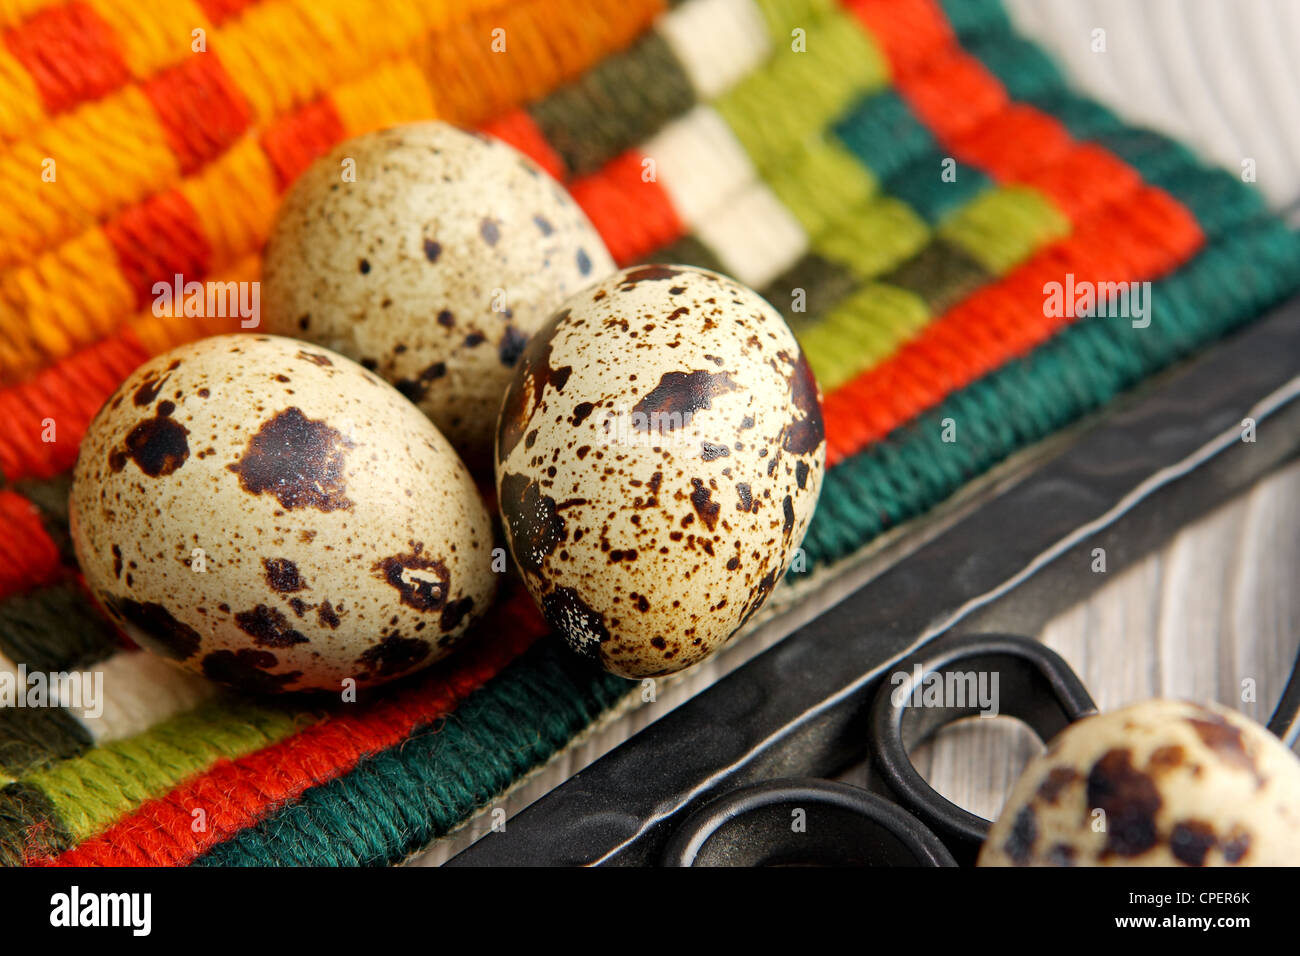 Quail eggs on the color material background Stock Photo